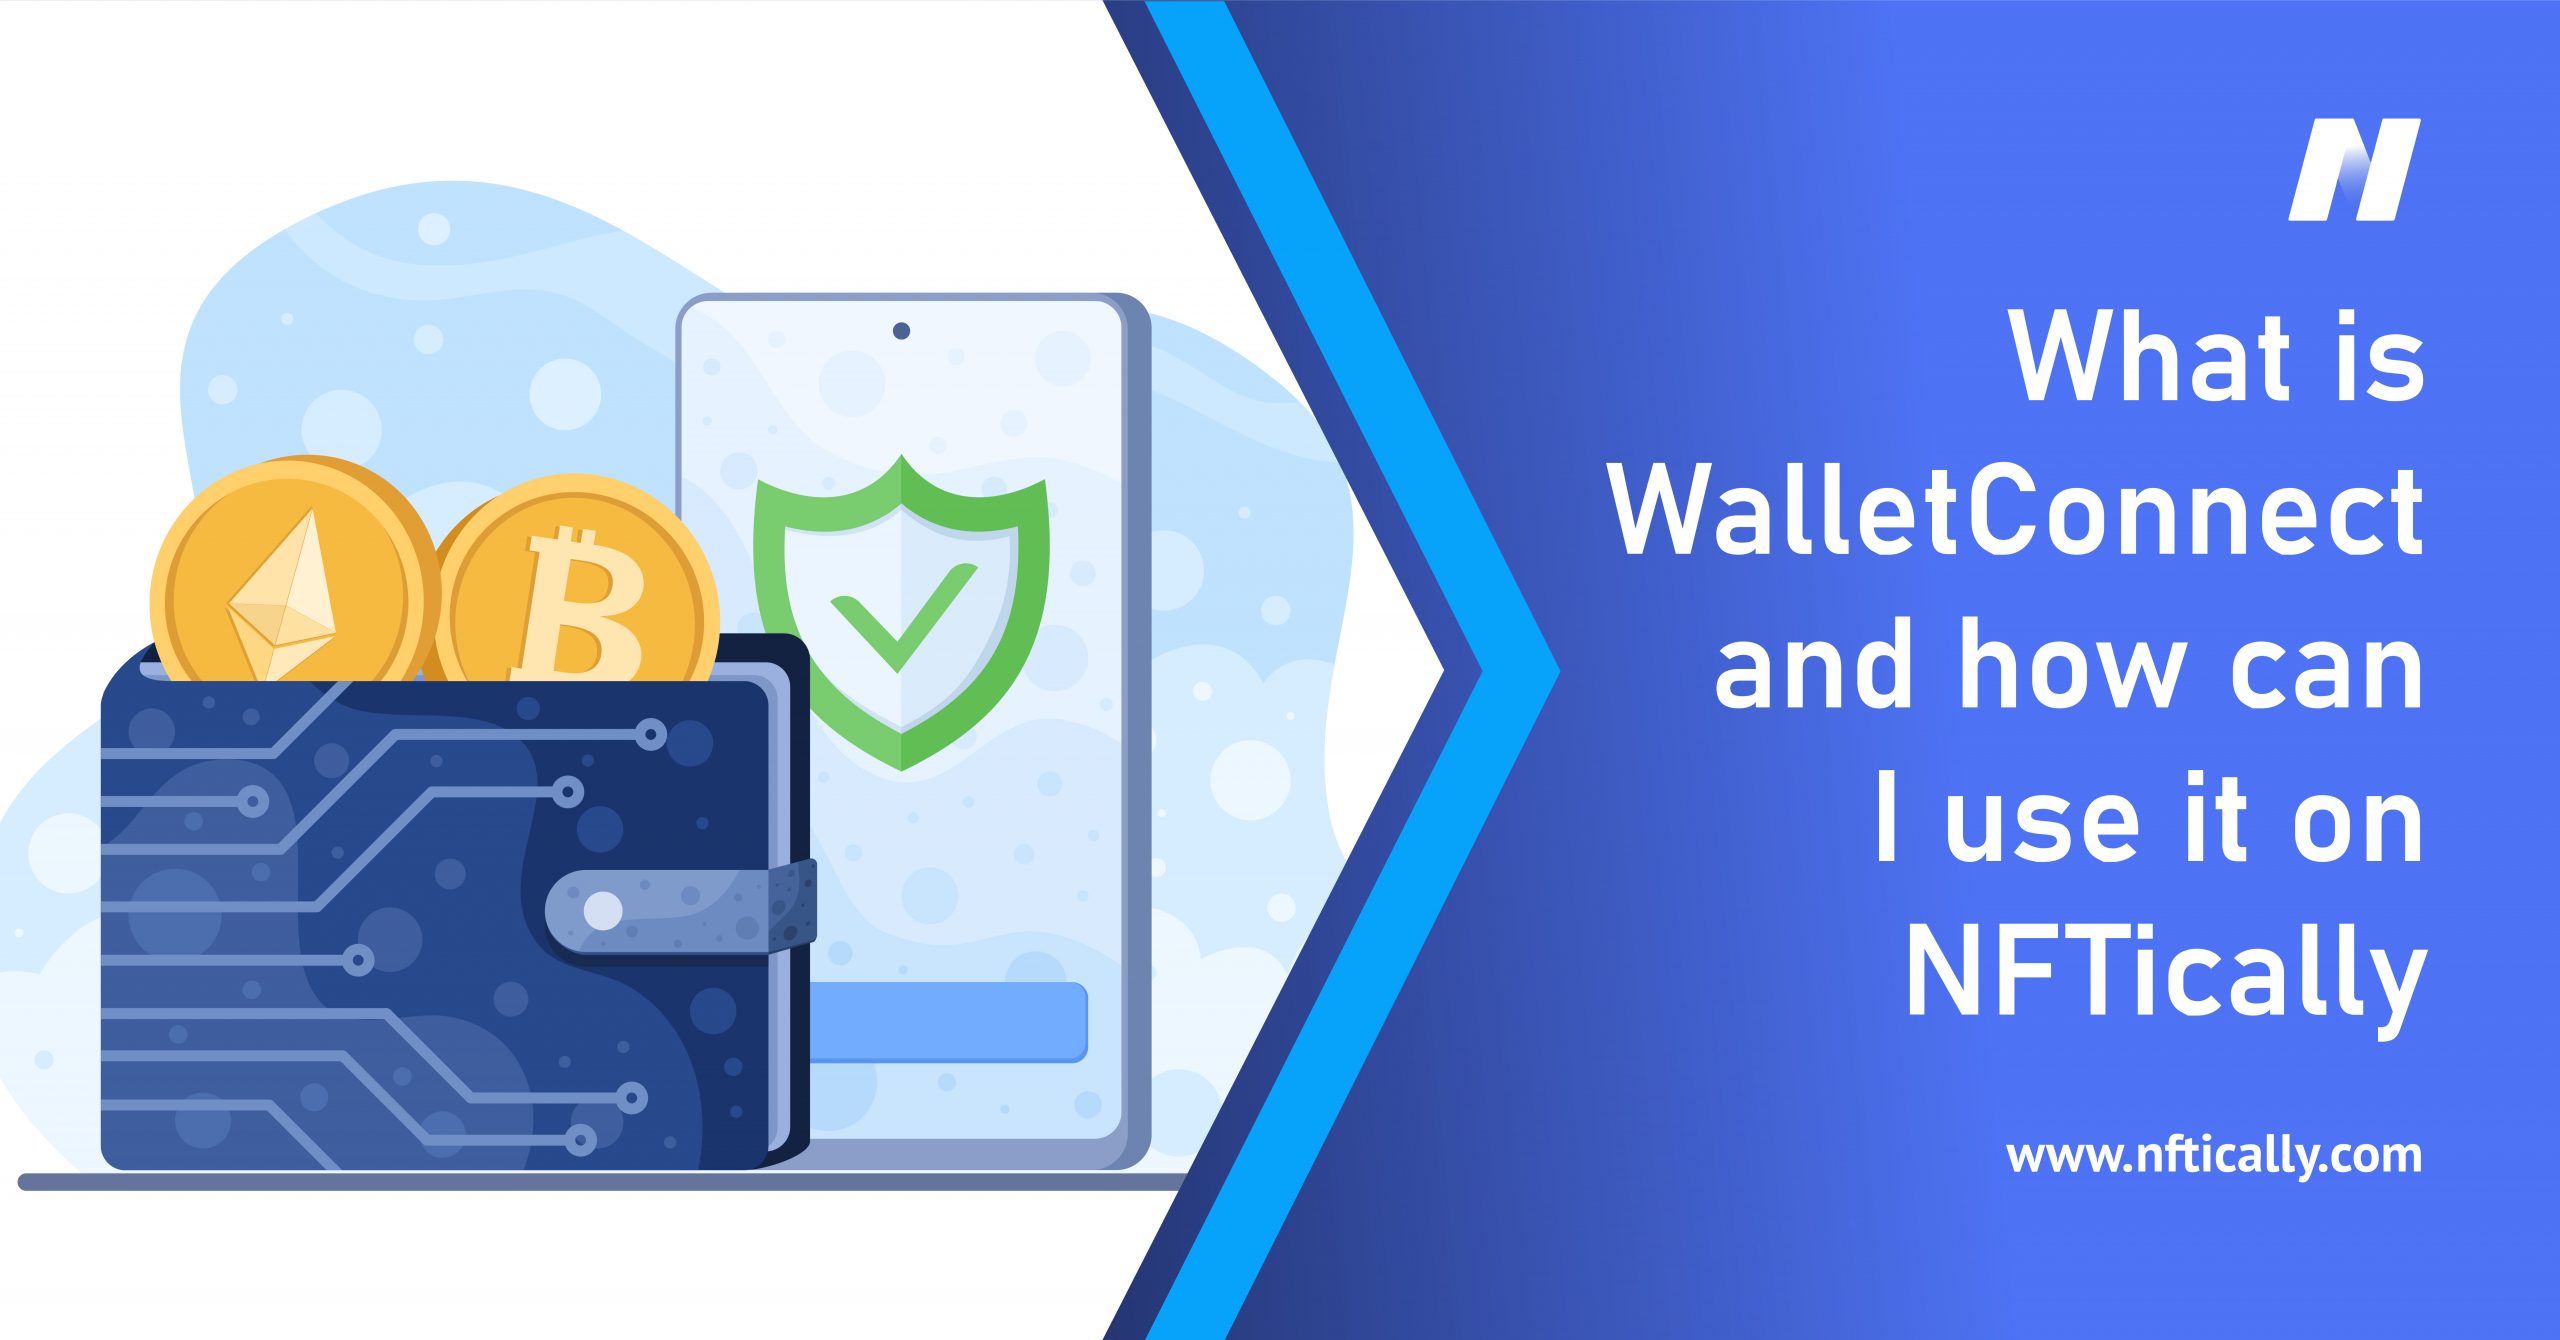 What is WalletConnect and how can I use it on NFTICALLY?